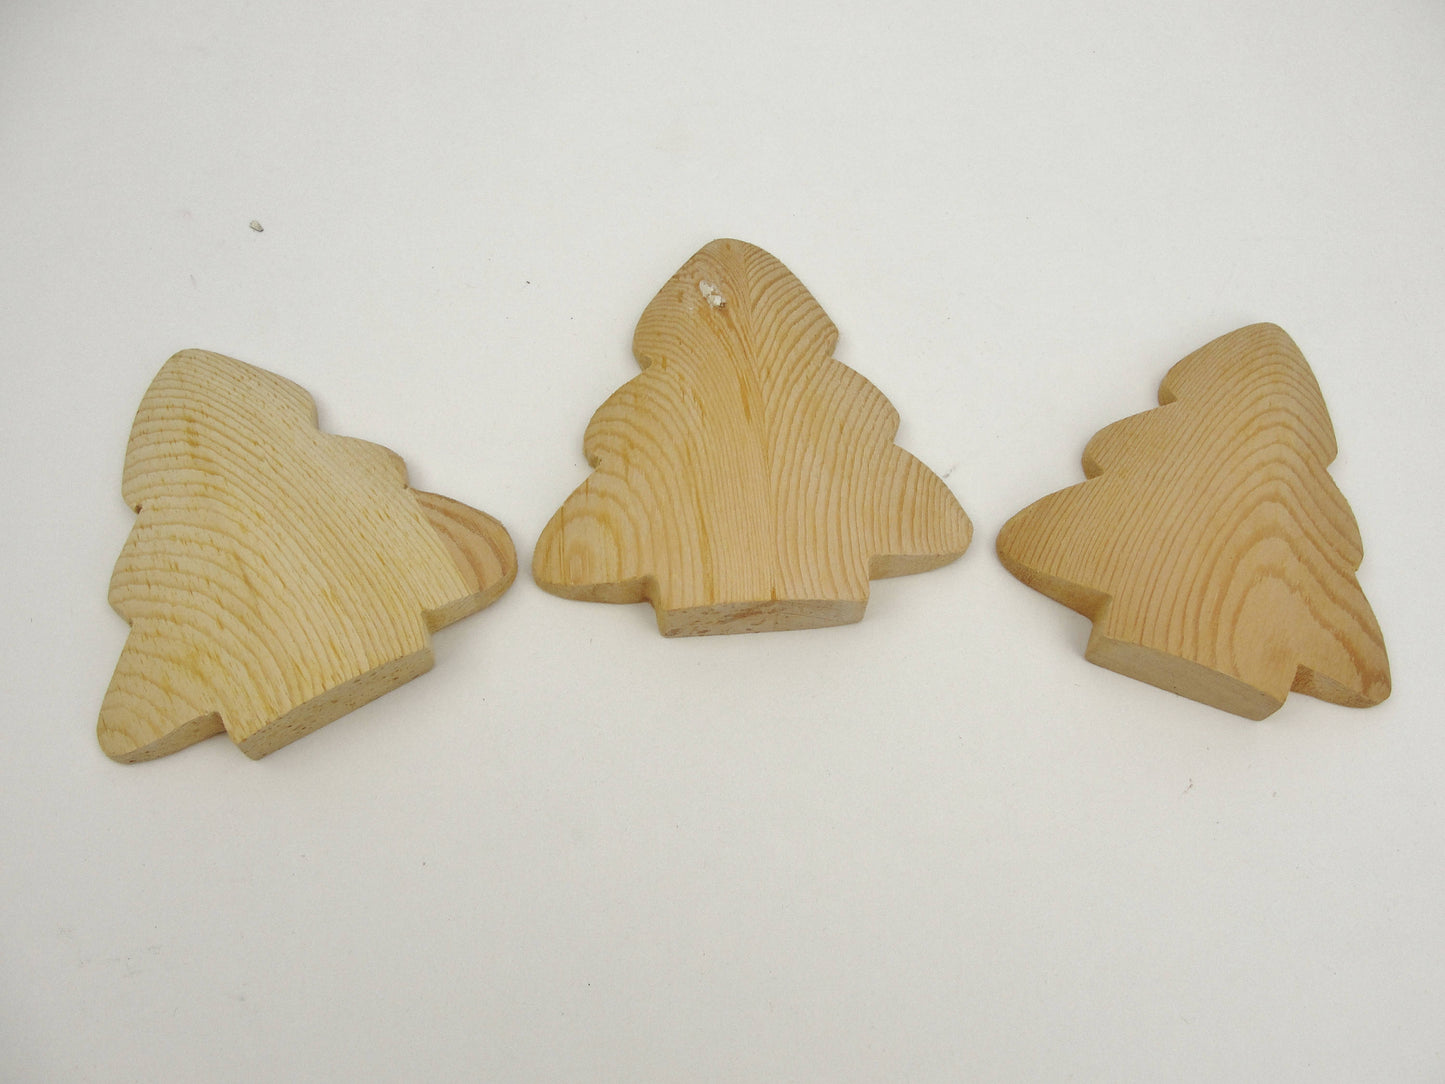 Short Puffy tree cutout unfinished diy 4 3/16" tall set of 3 - Wood parts - Craft Supply House